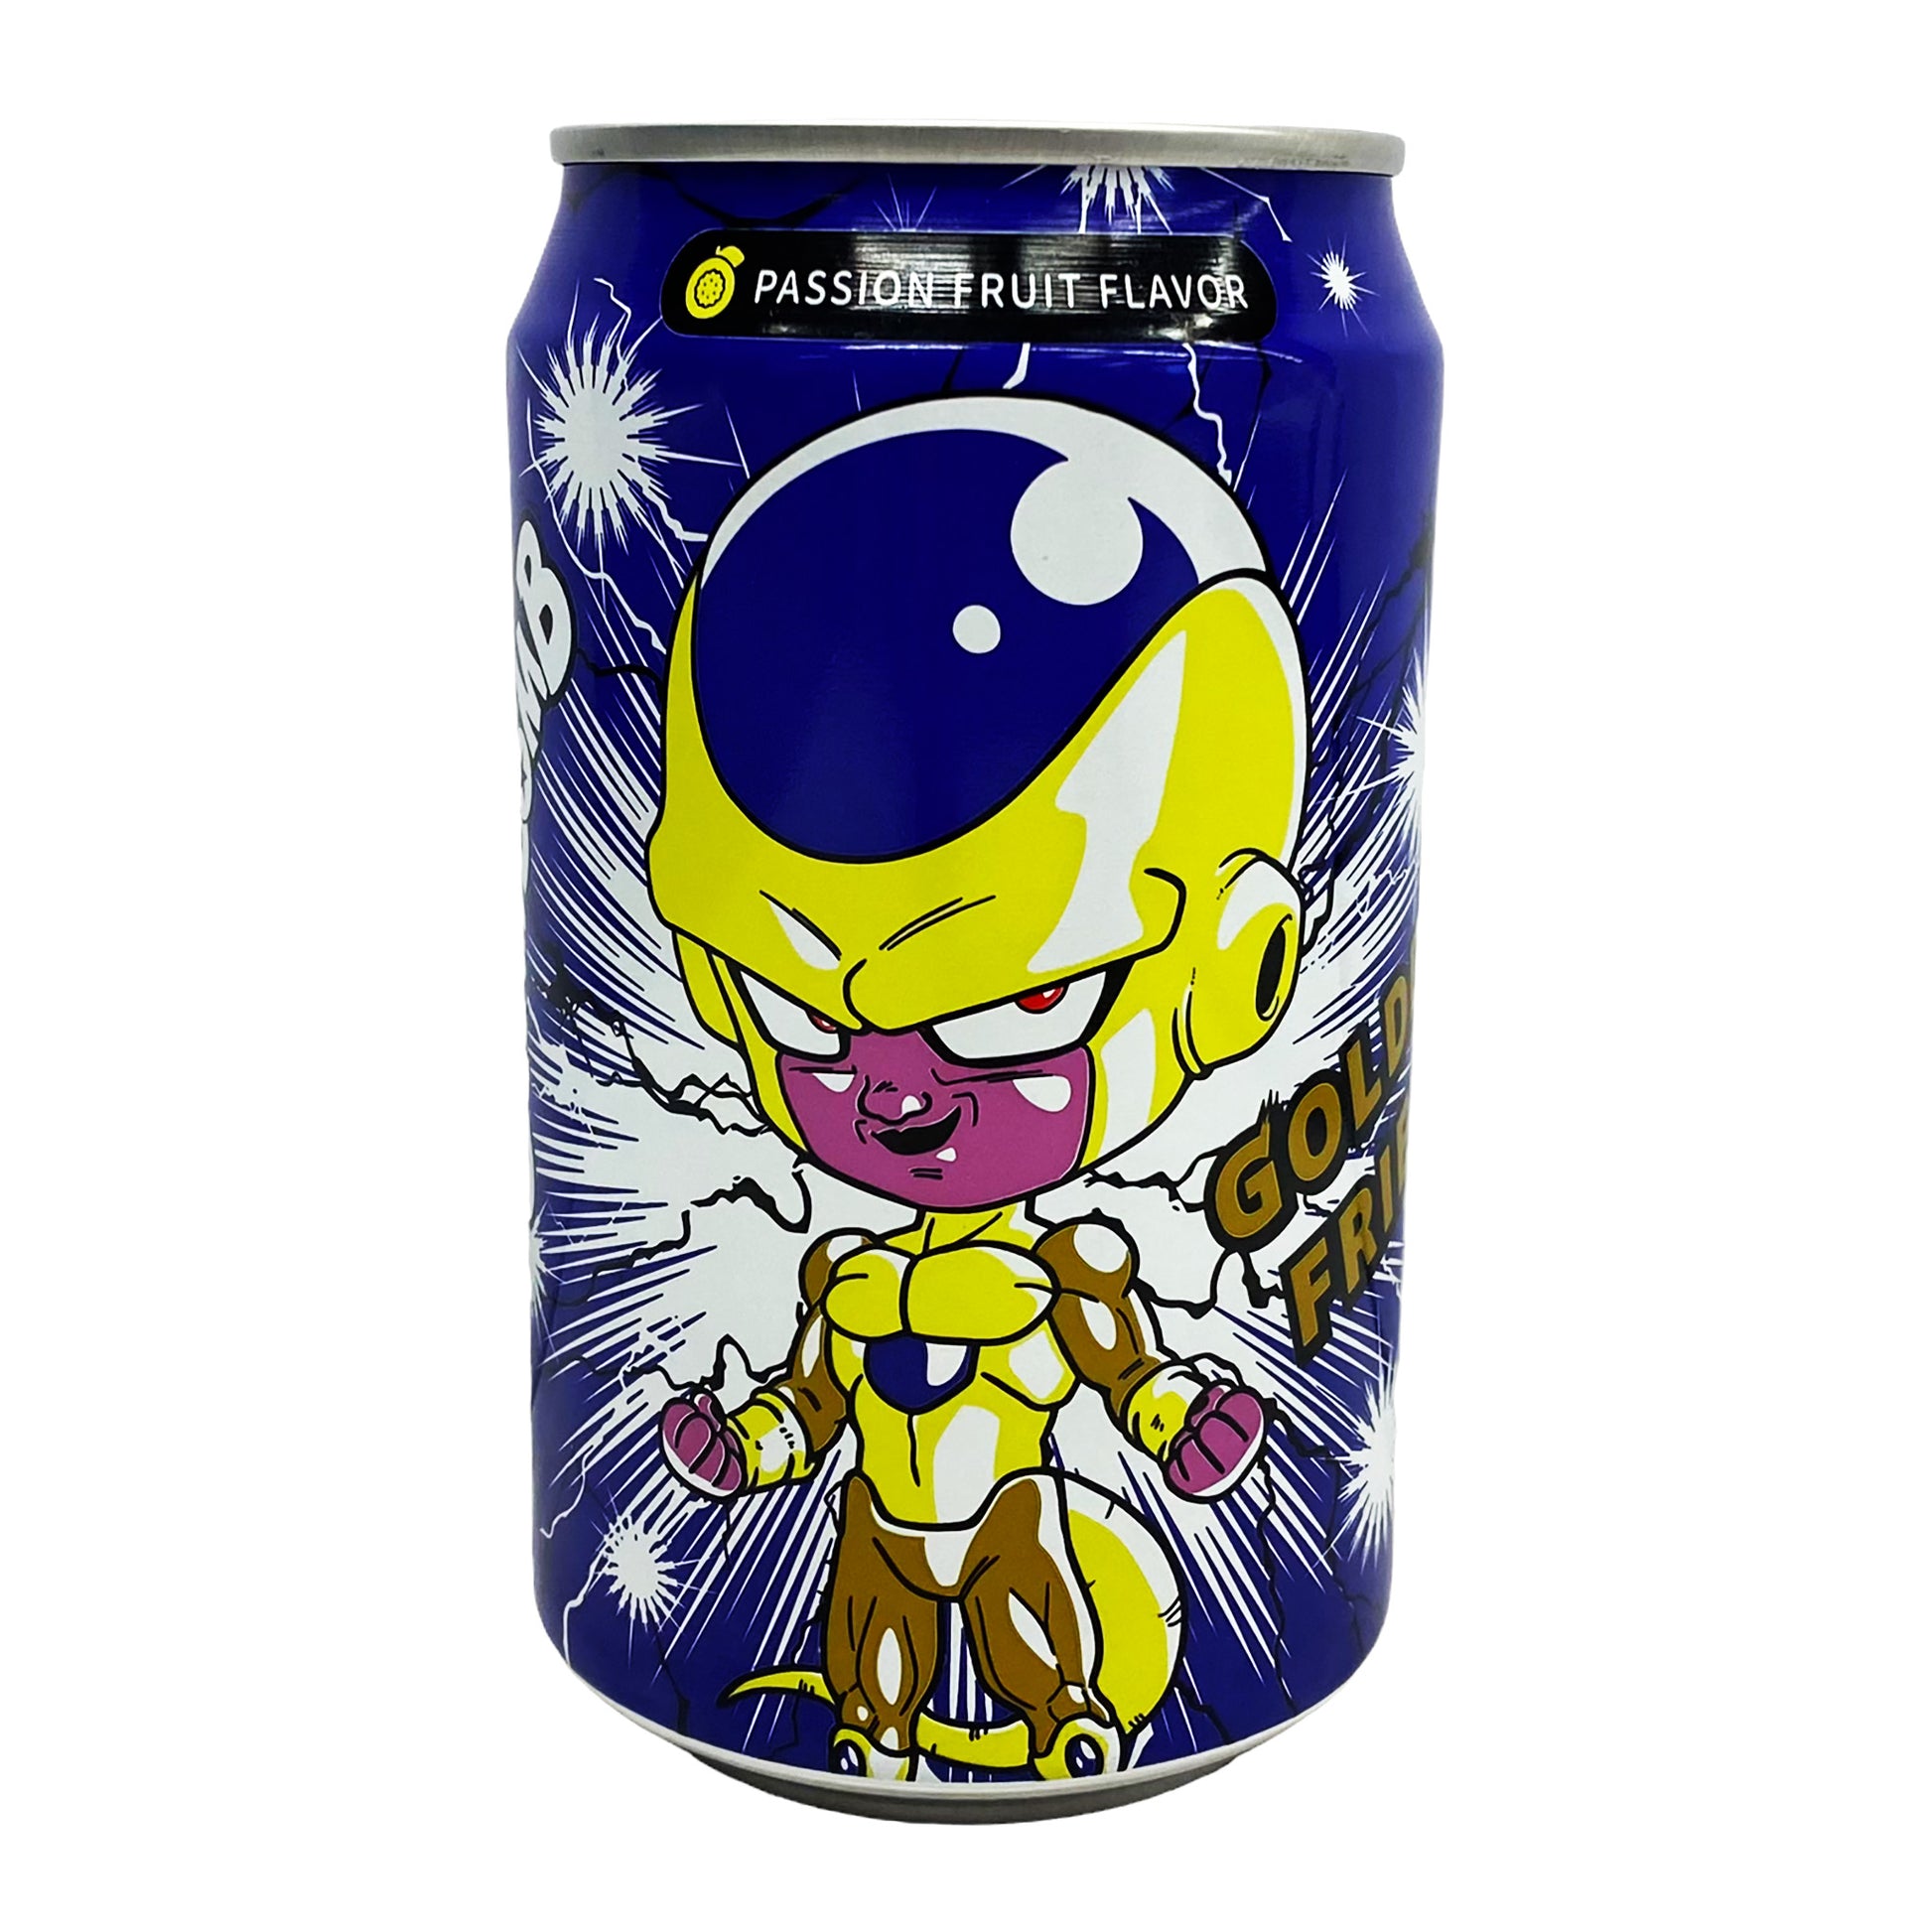 Front graphic view of Ocean Bomb Dragon Ball Z Golden Frieza Sparkling Water - Passion Fruit Flavor 11.1oz (330ml)